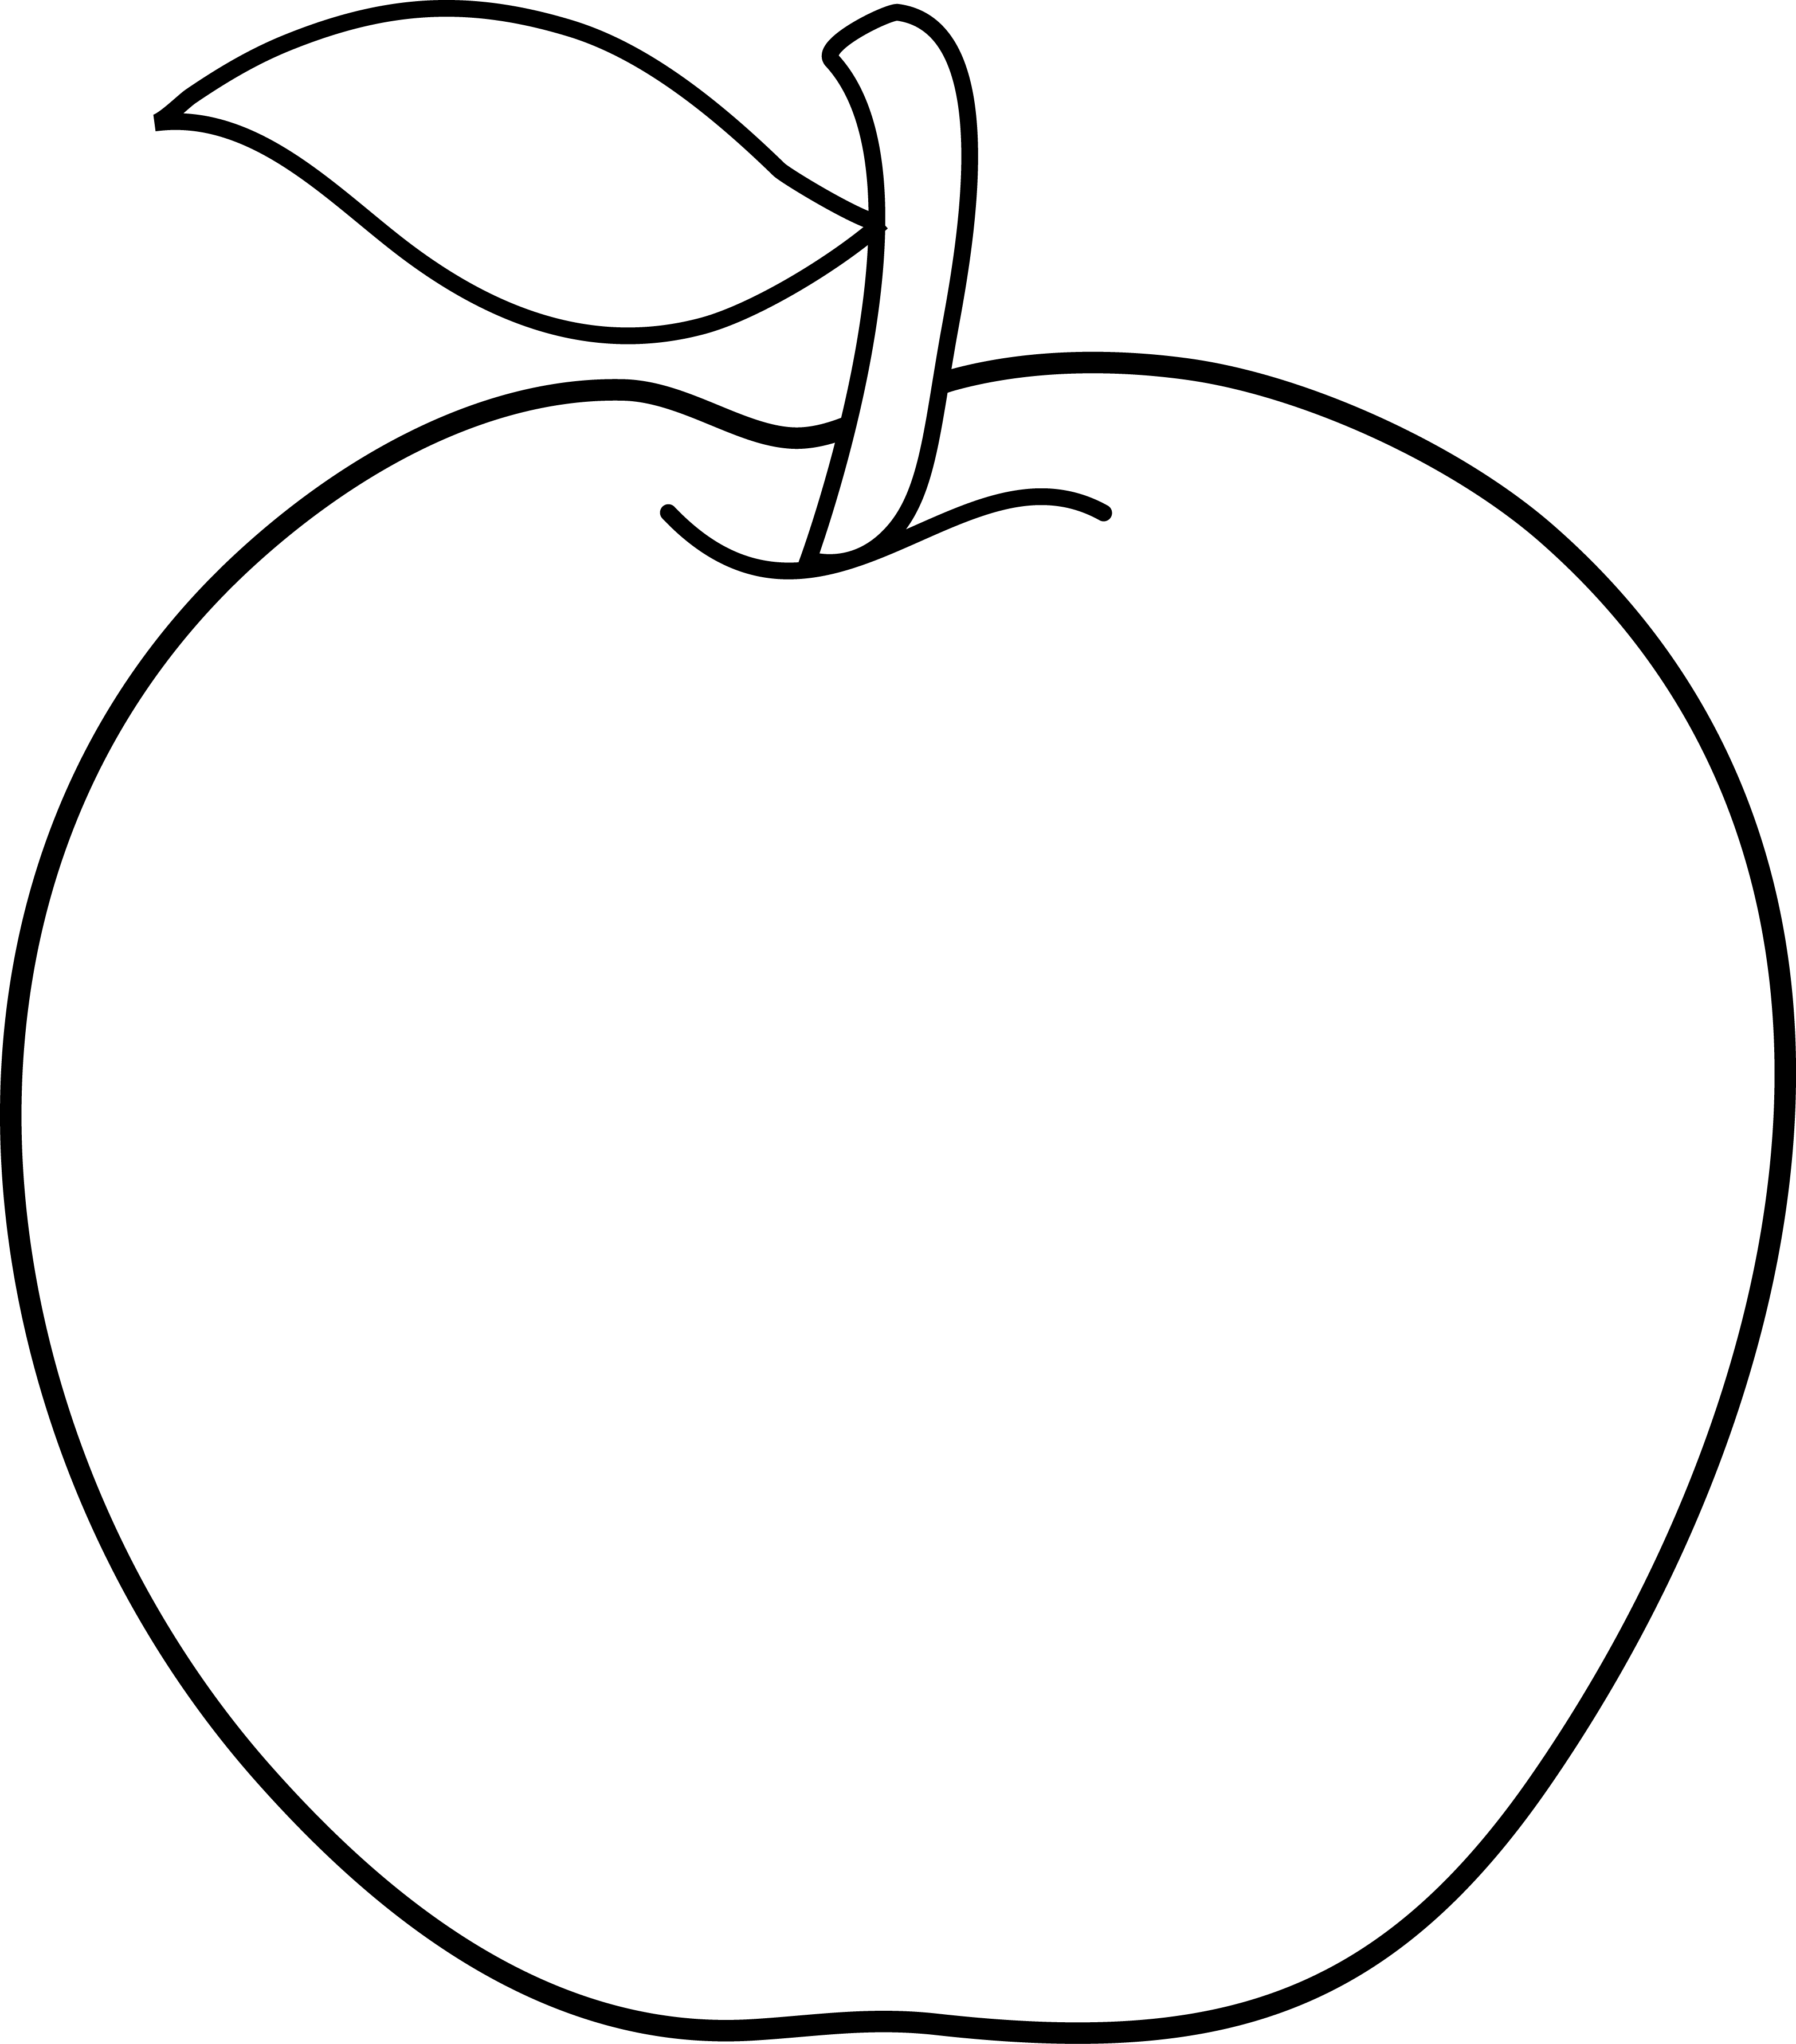 And White Apple Tree Clipart   Clipart Panda   Free Clipart Images